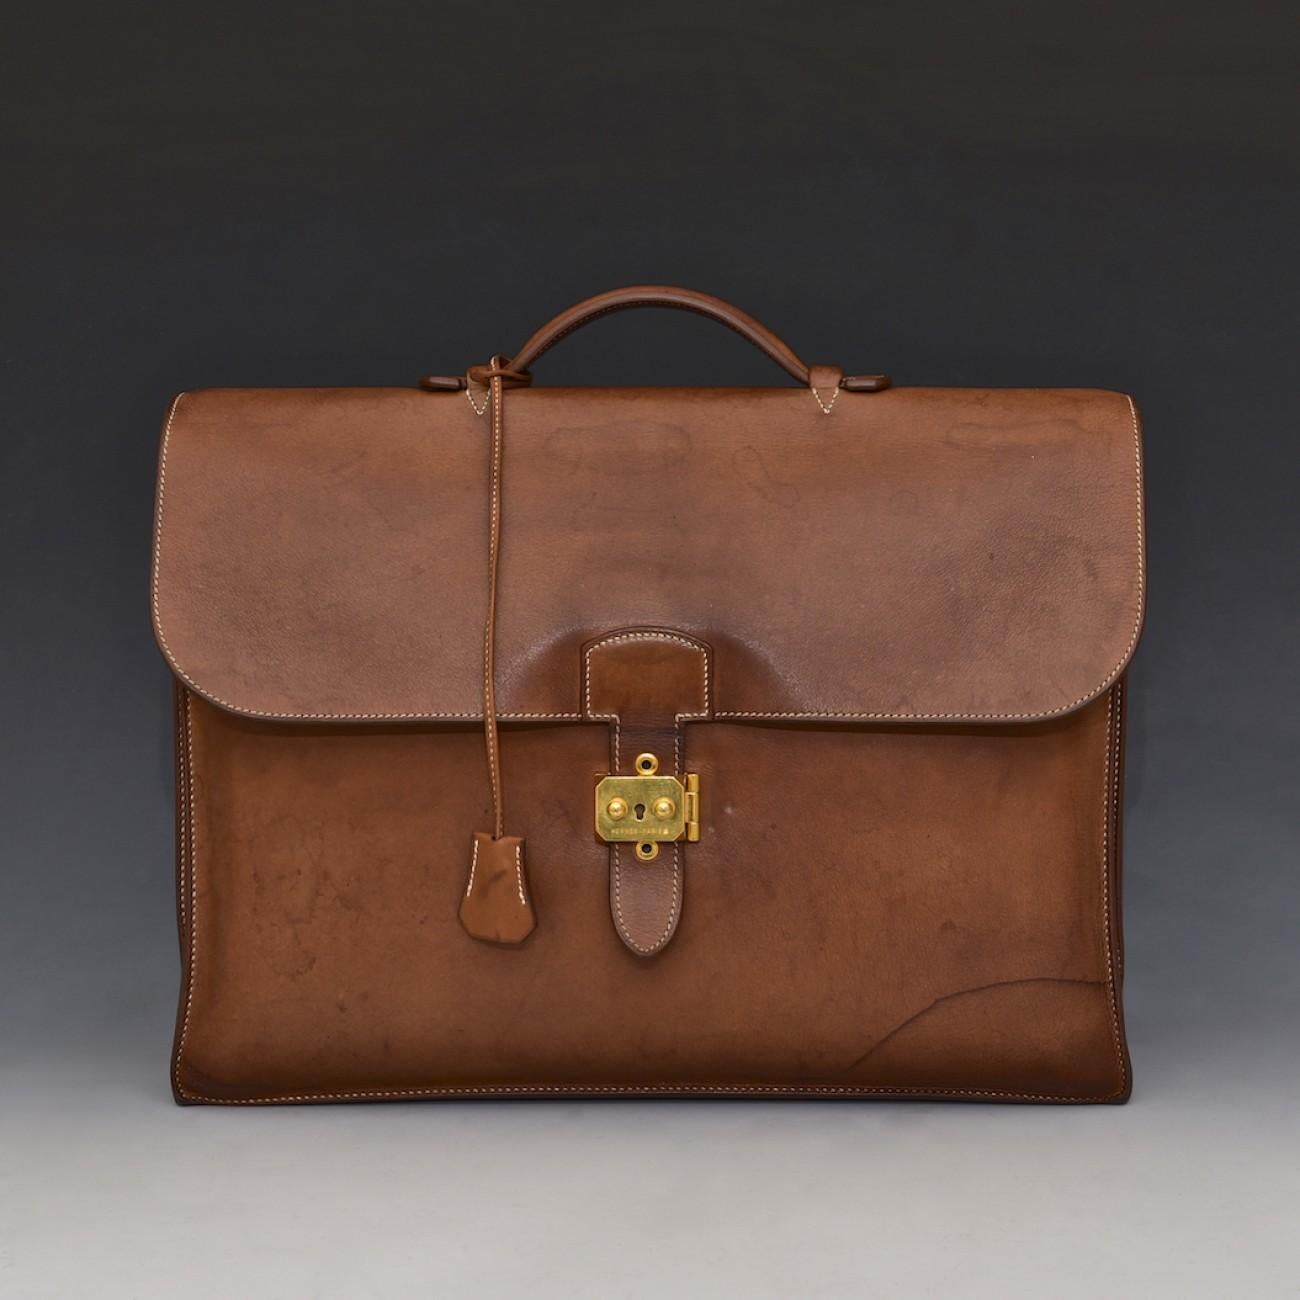 A stylish tan leather three pocket 'Sac à Dépêches' by Hermès; a design that can trace its origins back to 1928. One of the best looking briefcases we've seen; this case has a gold plated lock, comes complete with clochette and a key, is not